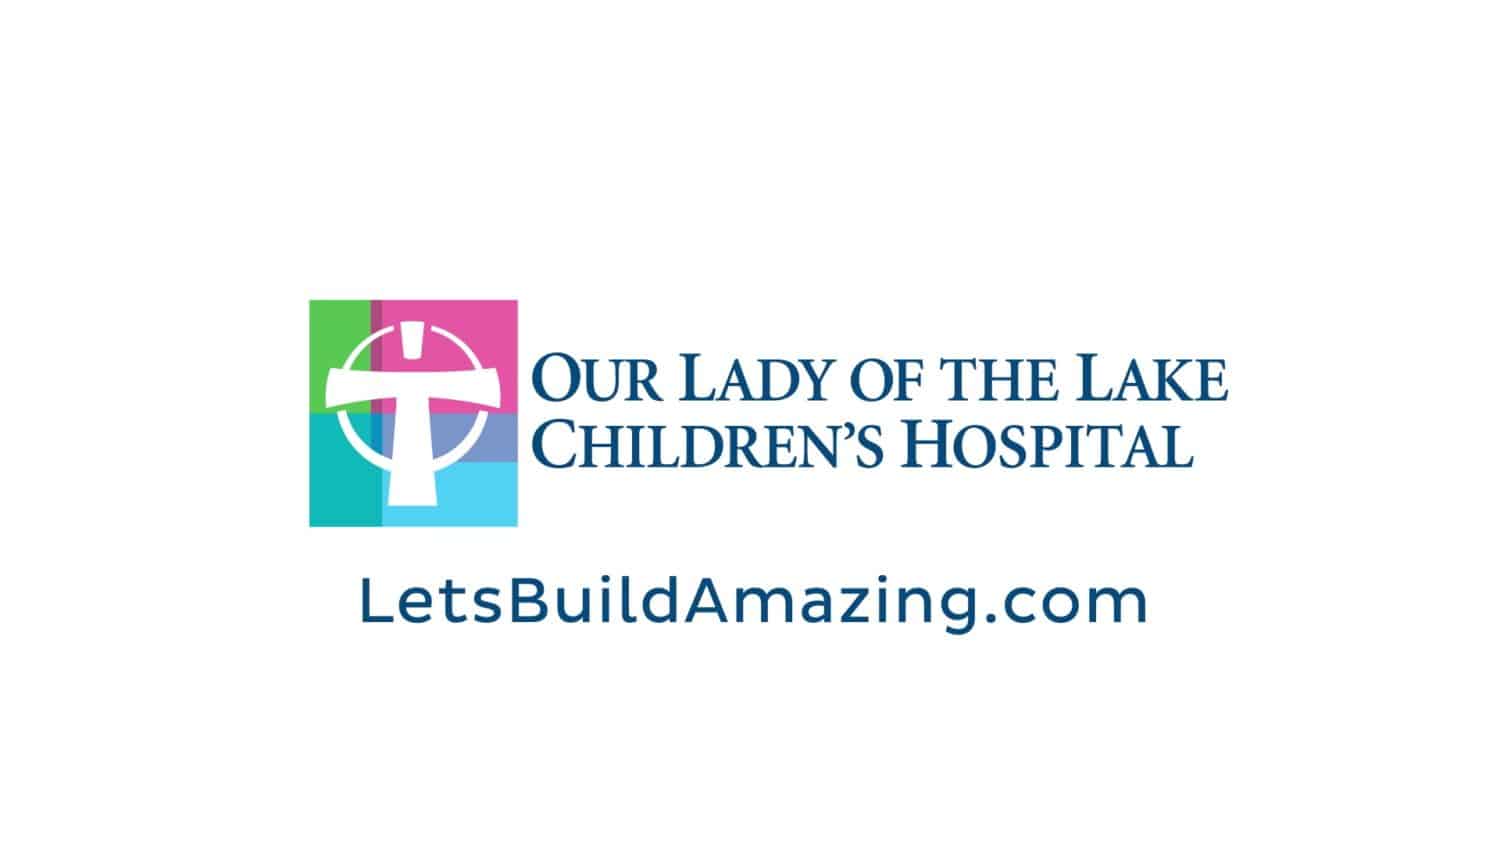 Our Lady of the Lake children's hospital colorful logo on a white backdrop